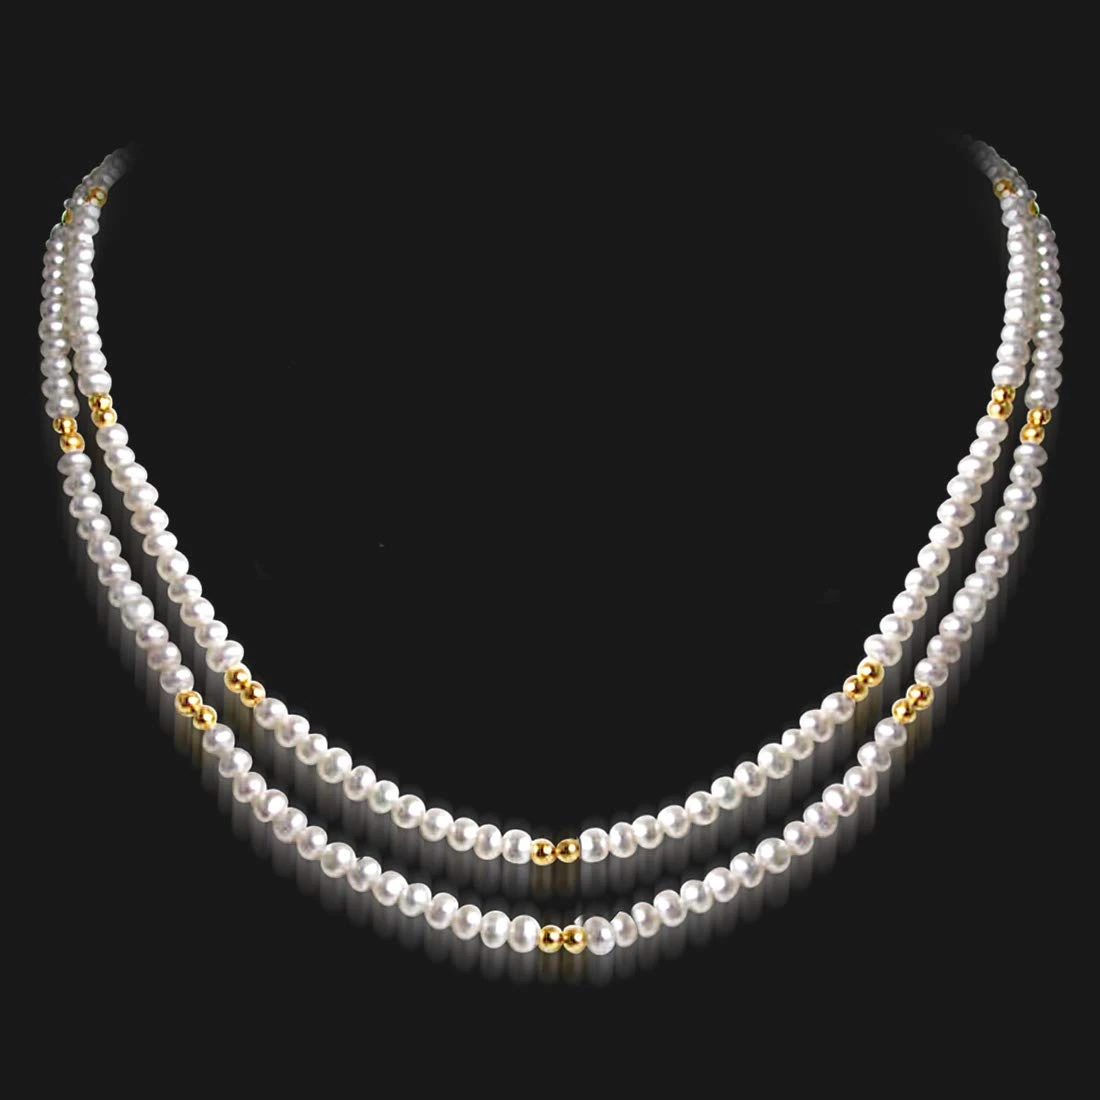 Real Pearl Glow - 2 Line Freshwater Pearl & Gold Plated Beads Necklace for Women (SN58)